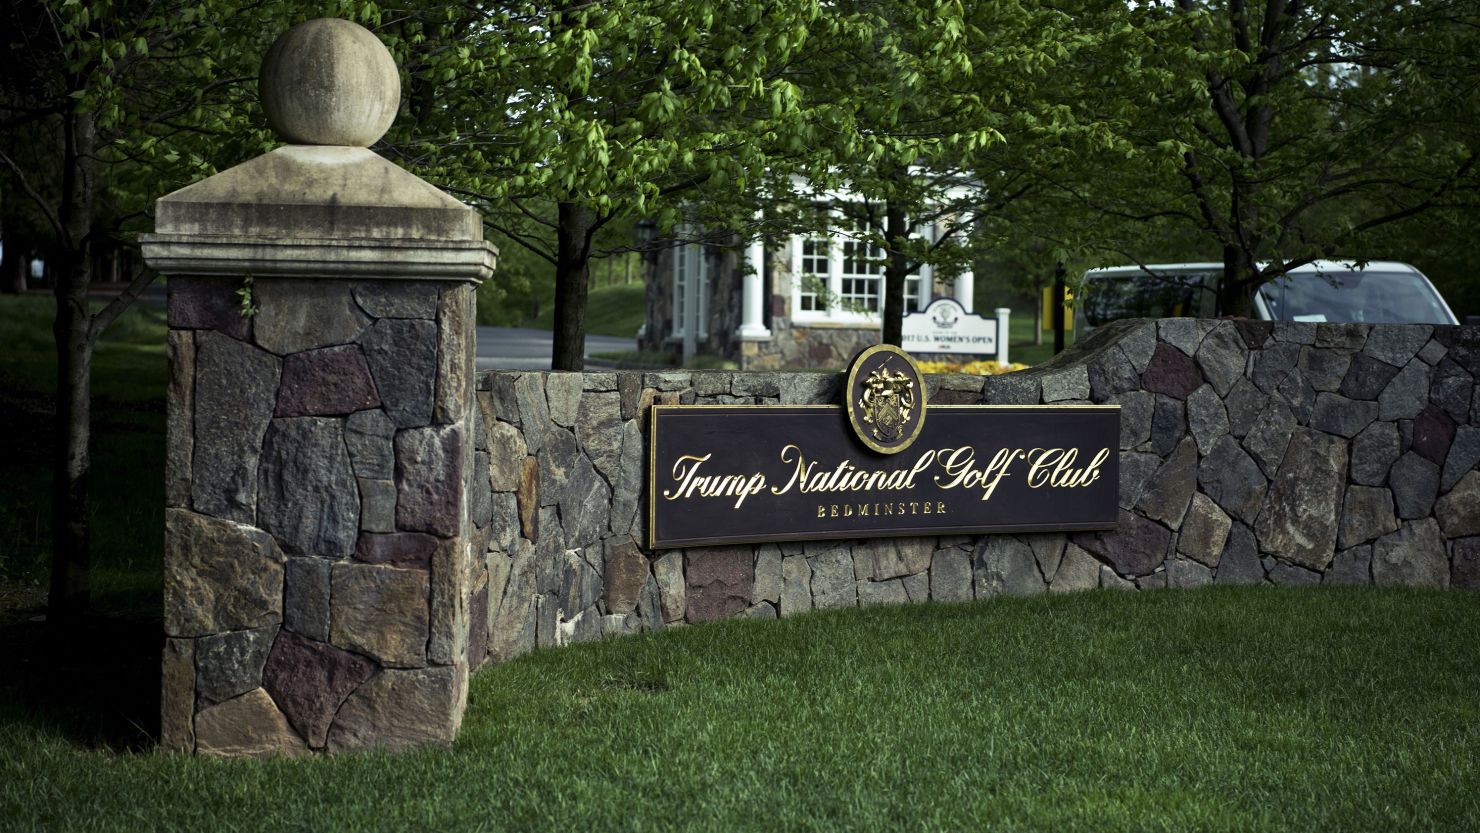 A view of the Trump National Golf Club while US President Donald Trump weekends at the facility on May 7, 2017 in Bedminster, New Jersey. / AFP PHOTO / Brendan Smialowski (Photo credit should read BRENDAN SMIALOWSKI/AFP via Getty Images)